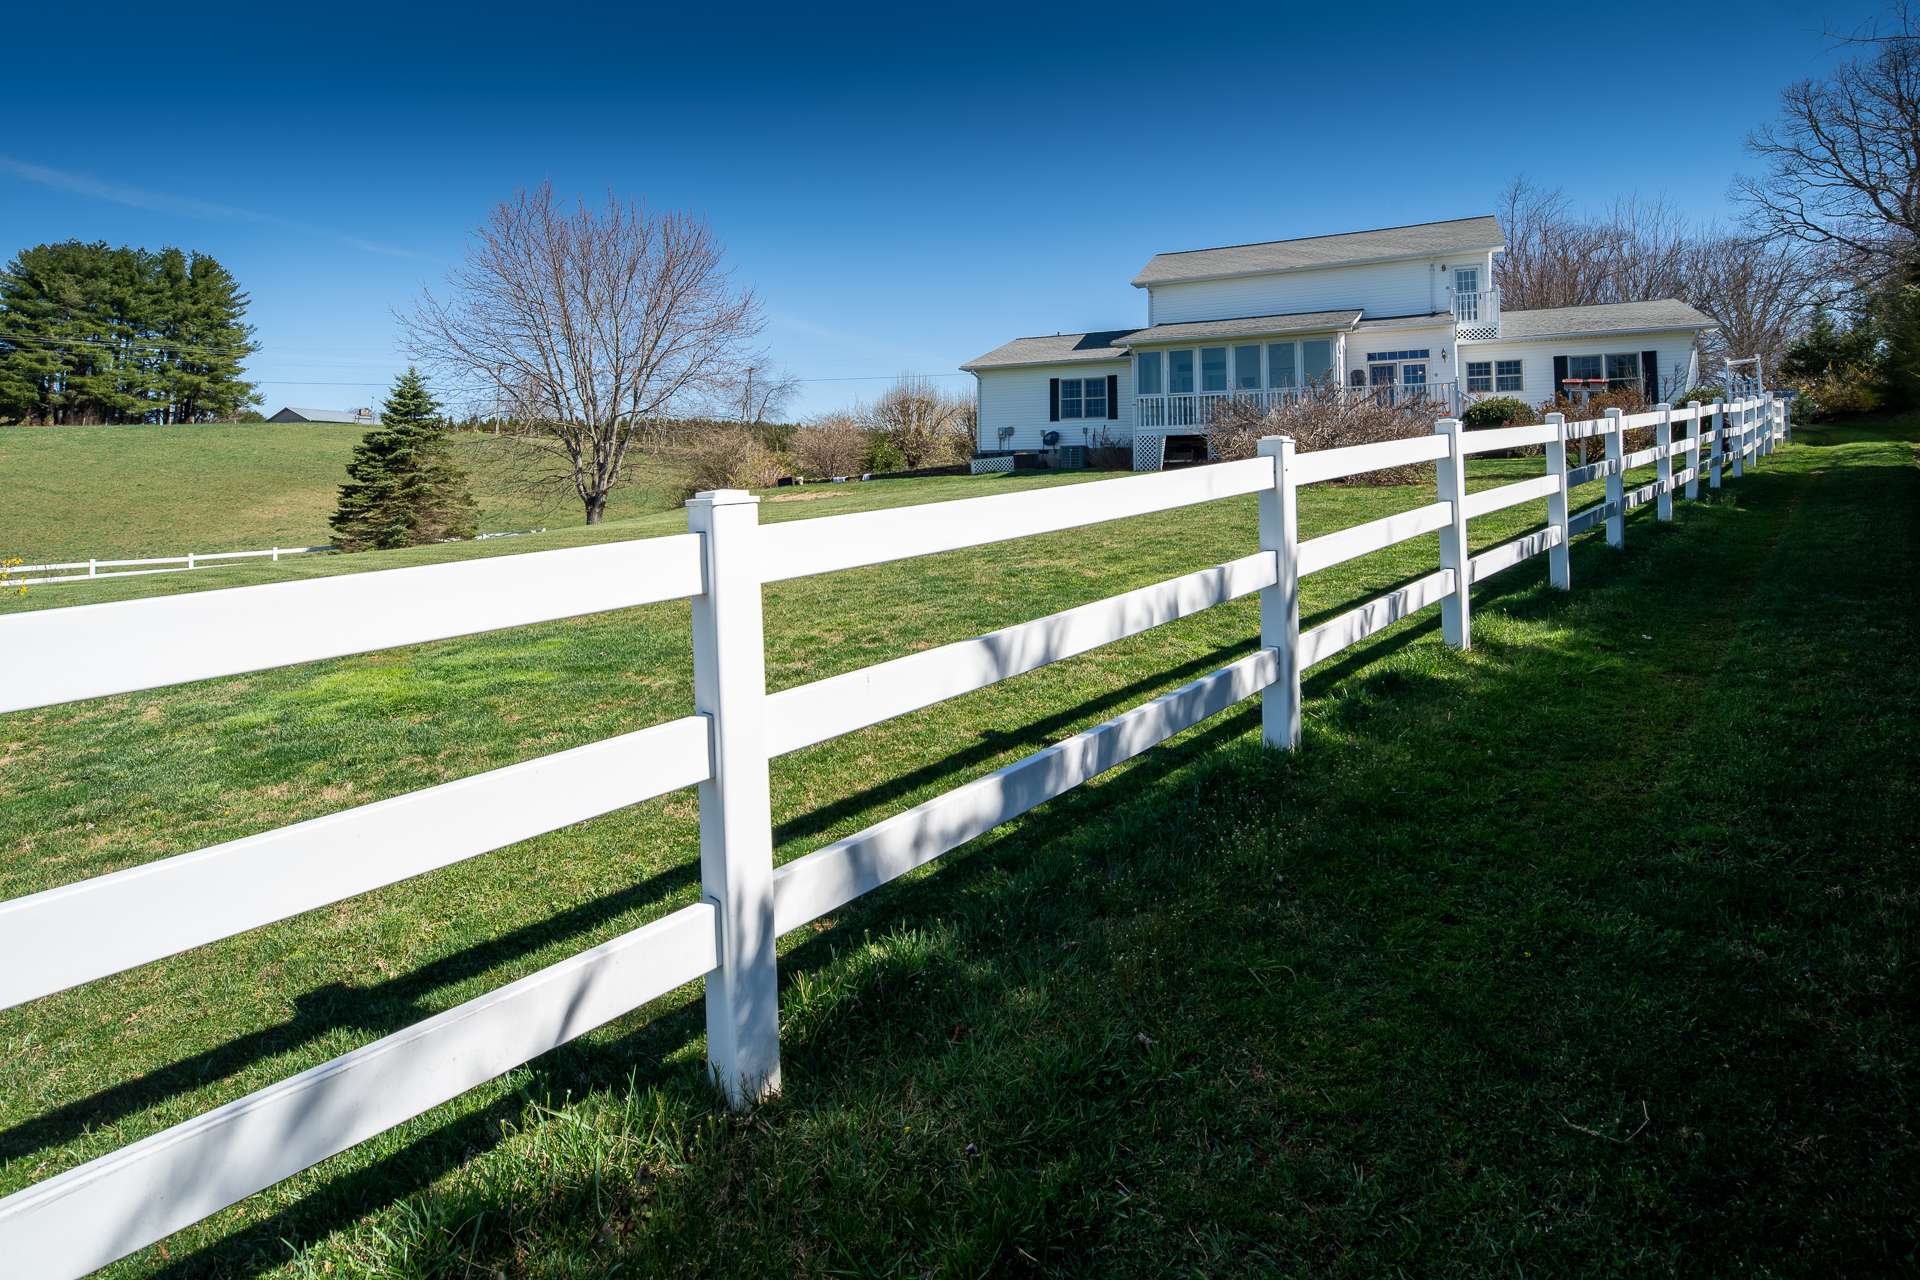 Partial fencing provides options for farm animals or crops.